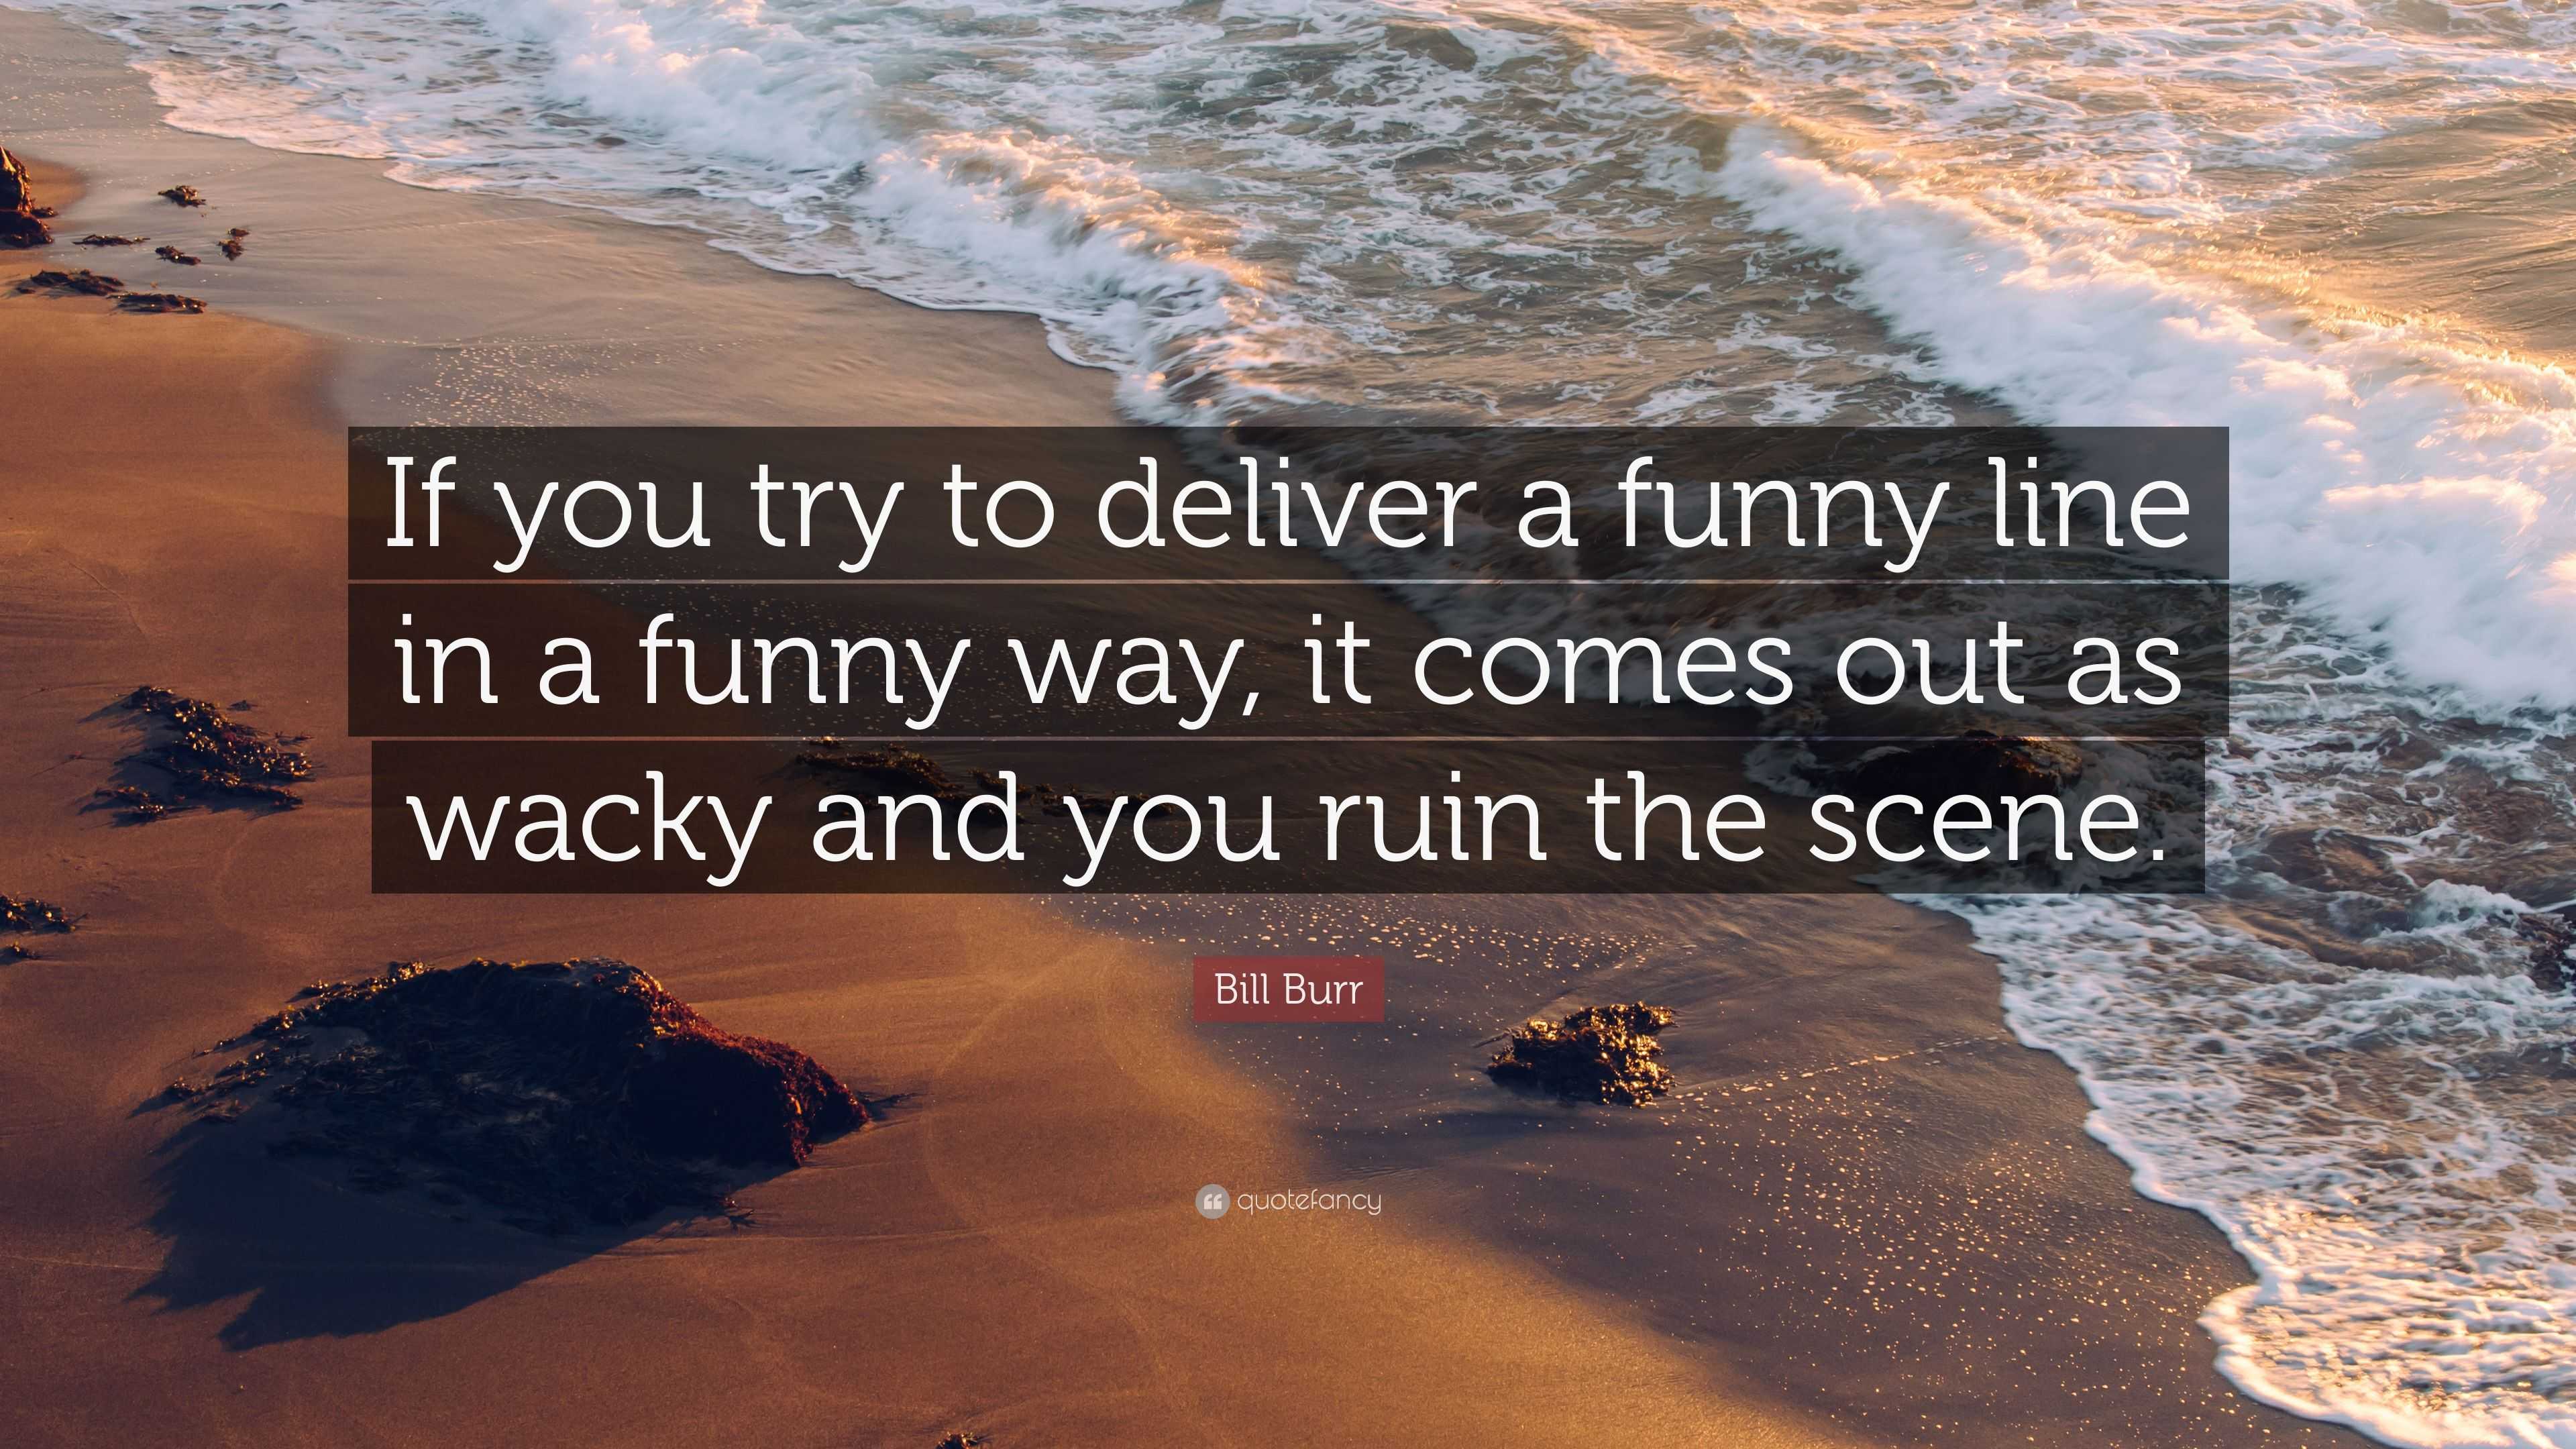 Bill Burr Quote: “If you try to deliver a funny line in a funny way, it ...